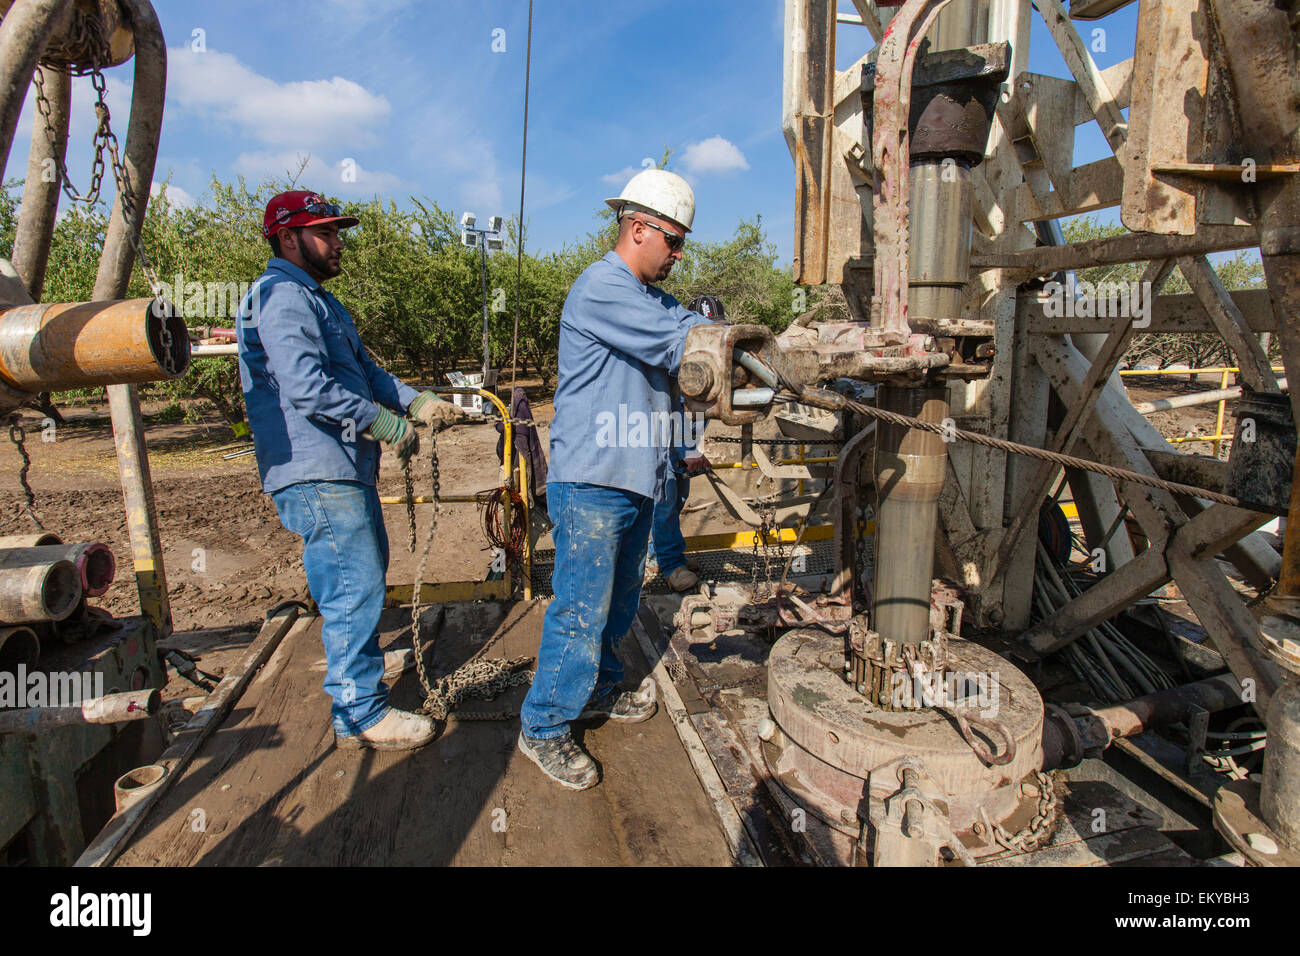 Water well being drilled in Almond orchard. Tulare County, San Joaquin Valley, California, USA Stock Photo